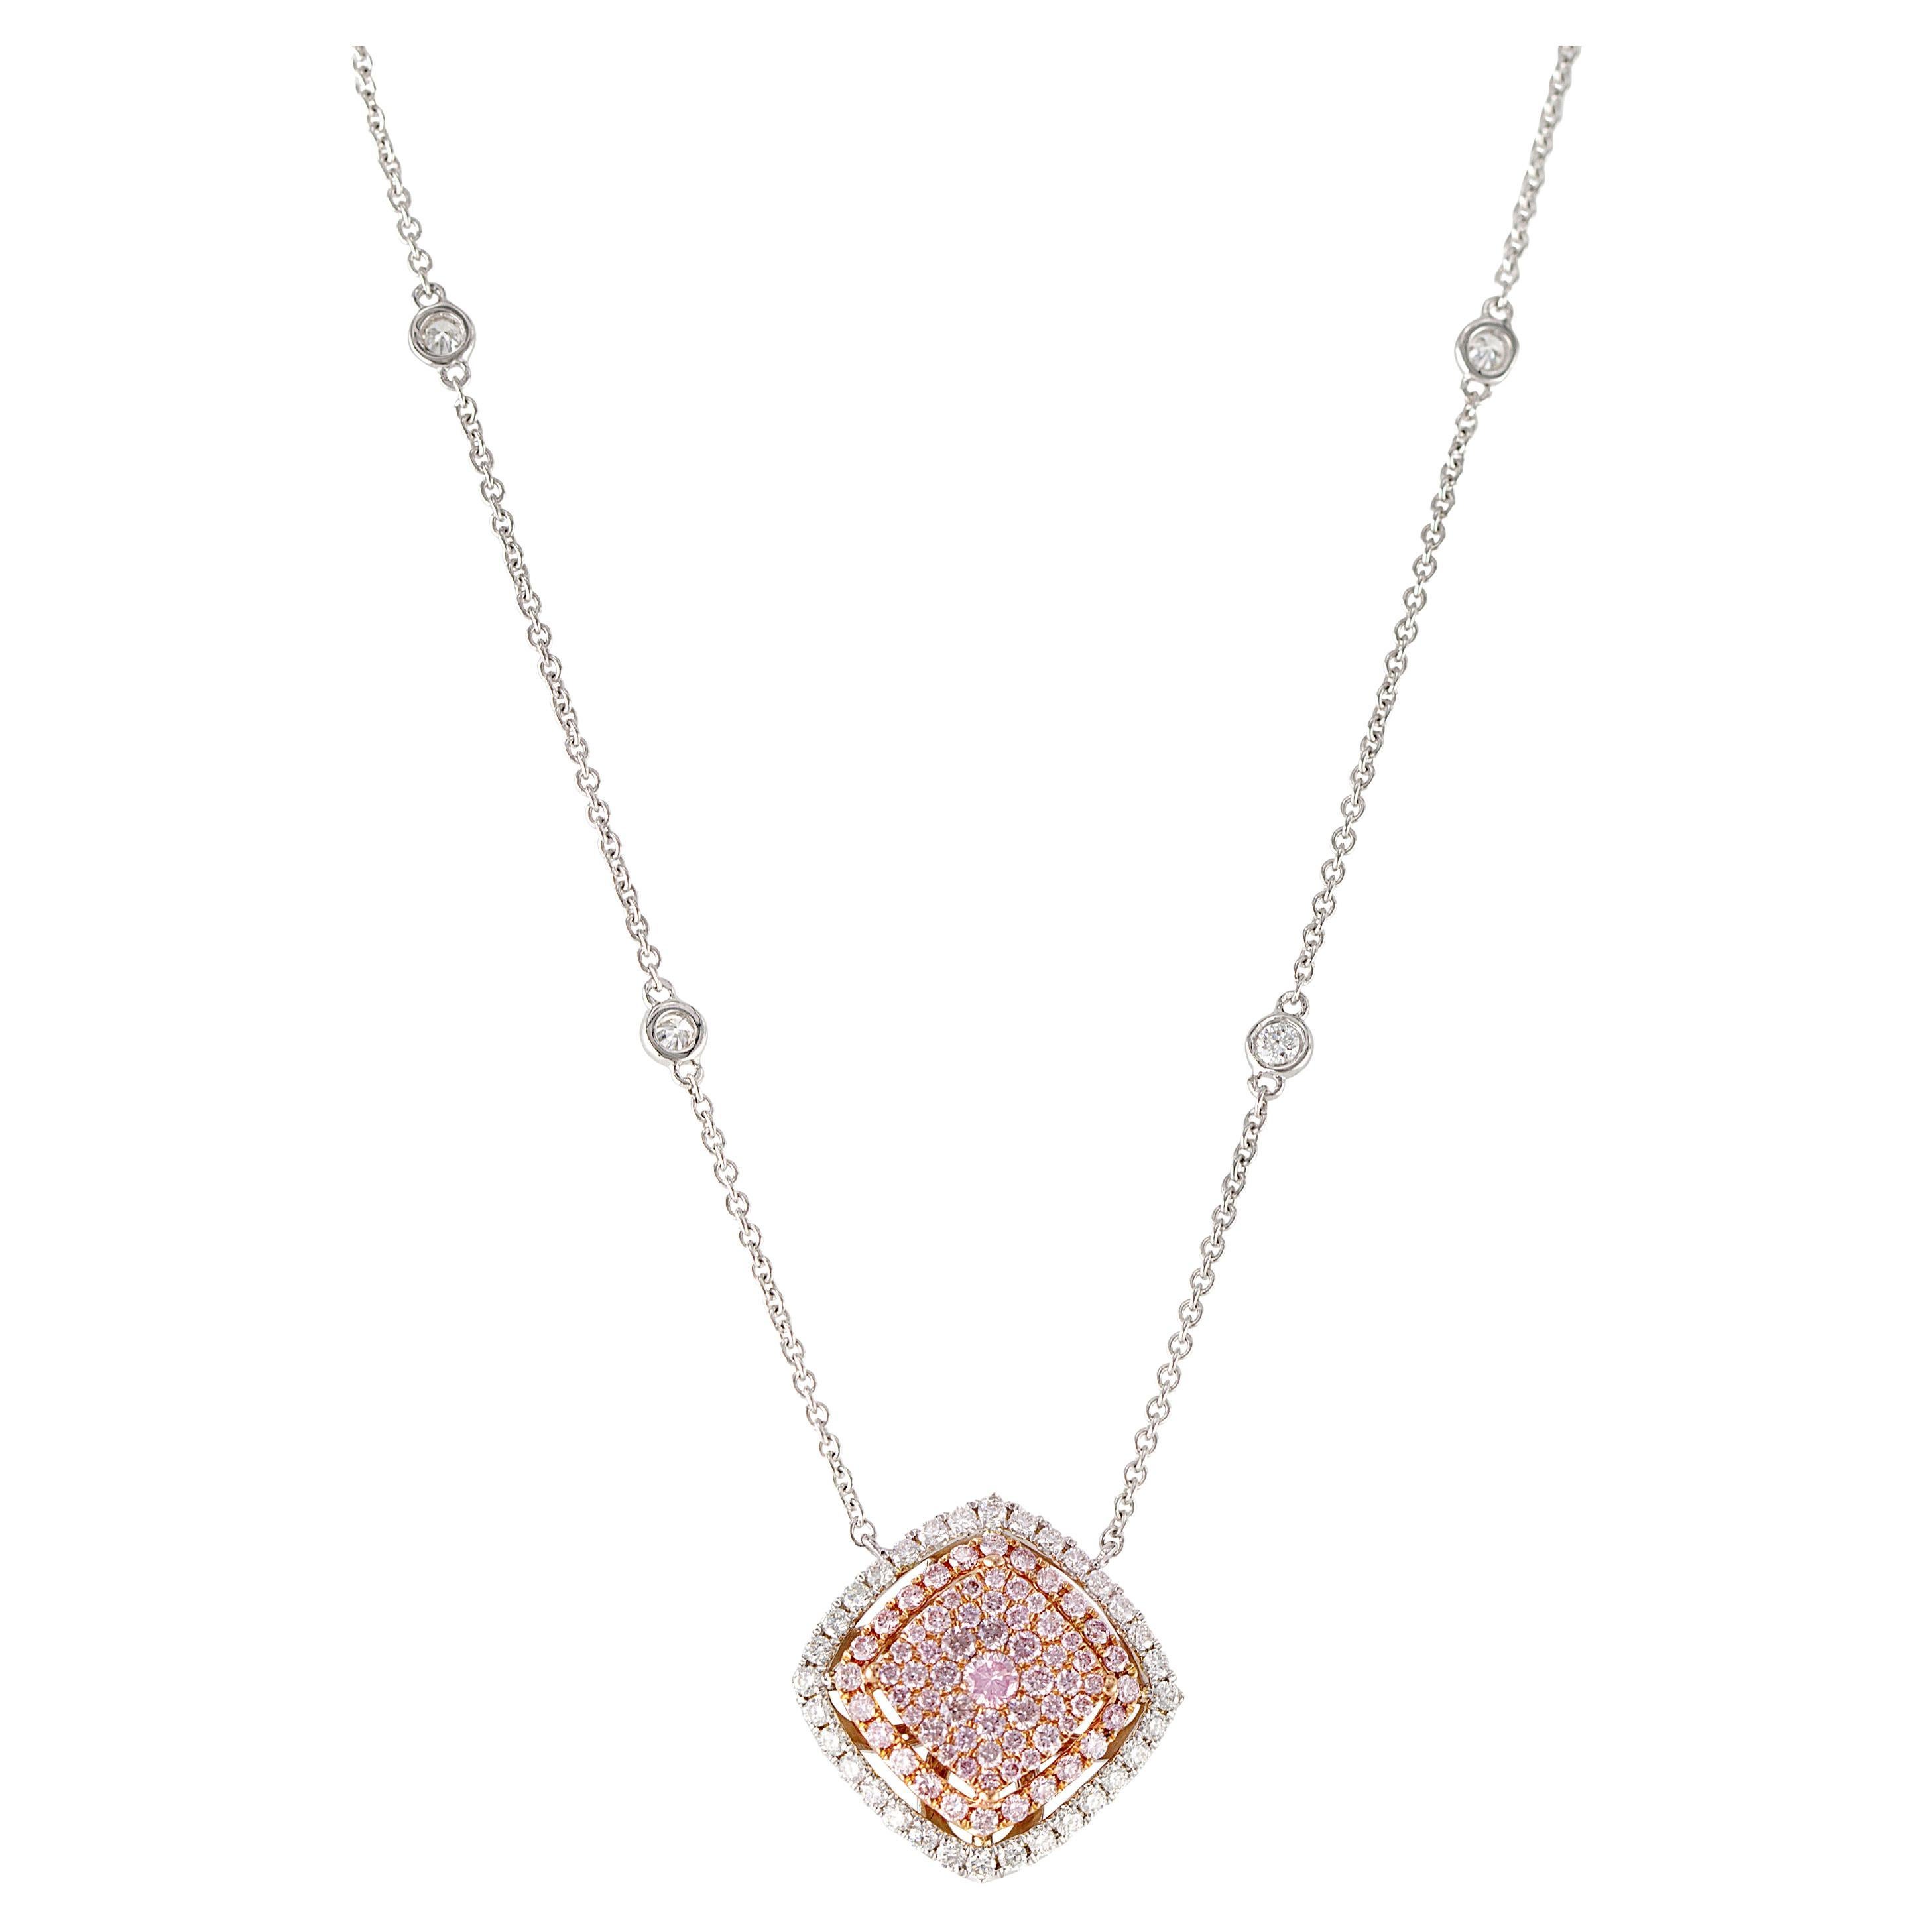 0.84 Carat Natural Pink and White Diamond Pendant in 18k Rose and White ref1994 For Sale